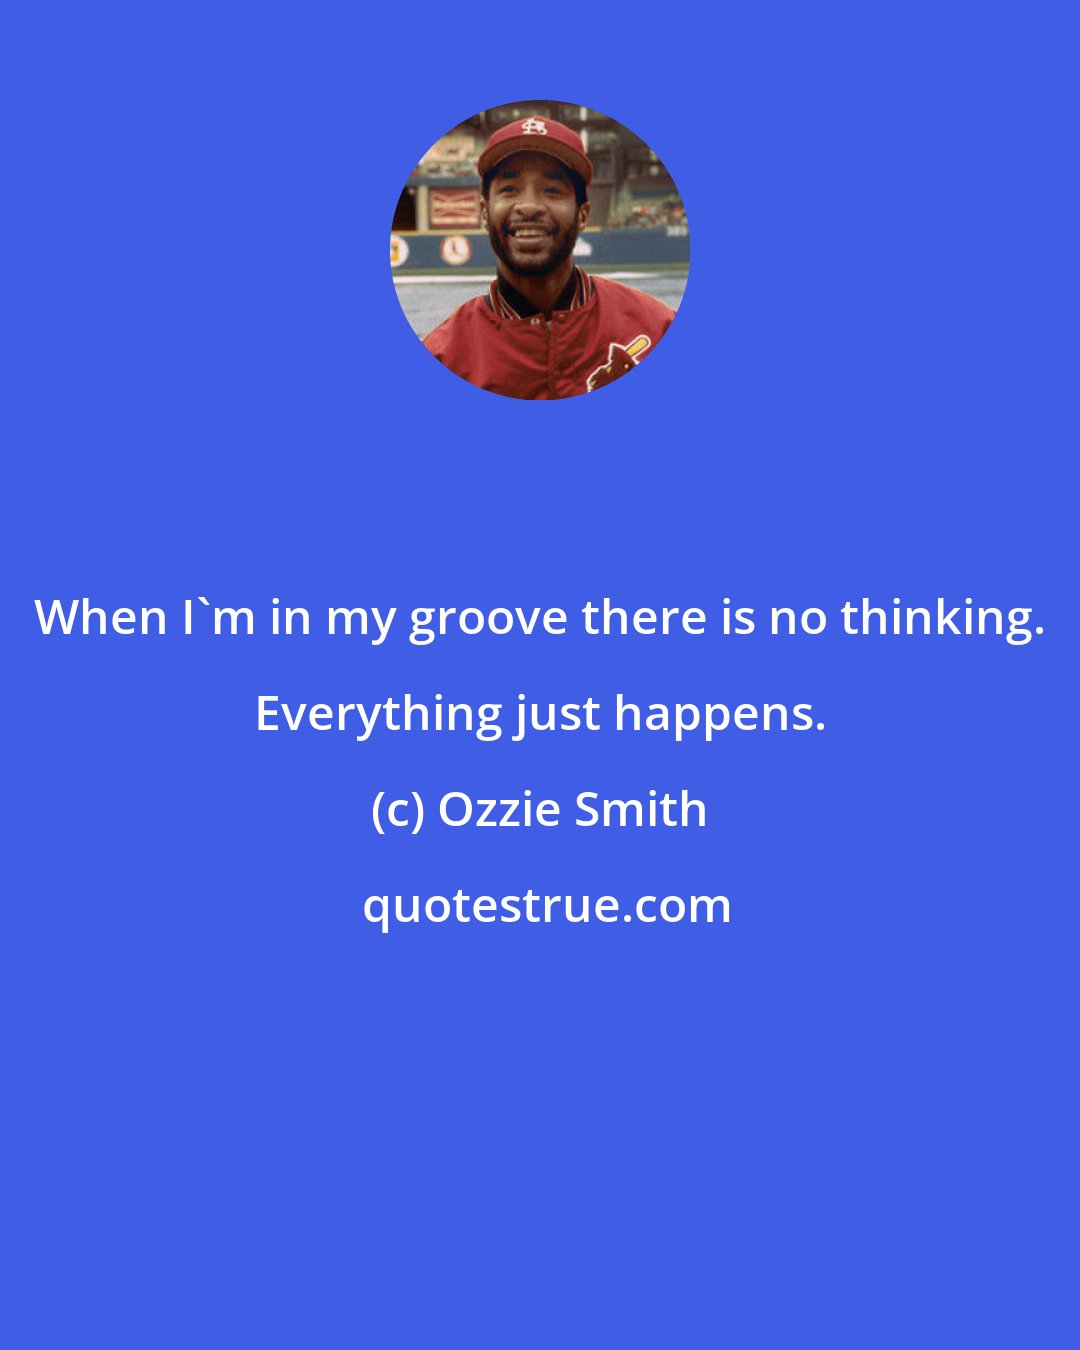 Ozzie Smith: When I'm in my groove there is no thinking. Everything just happens.